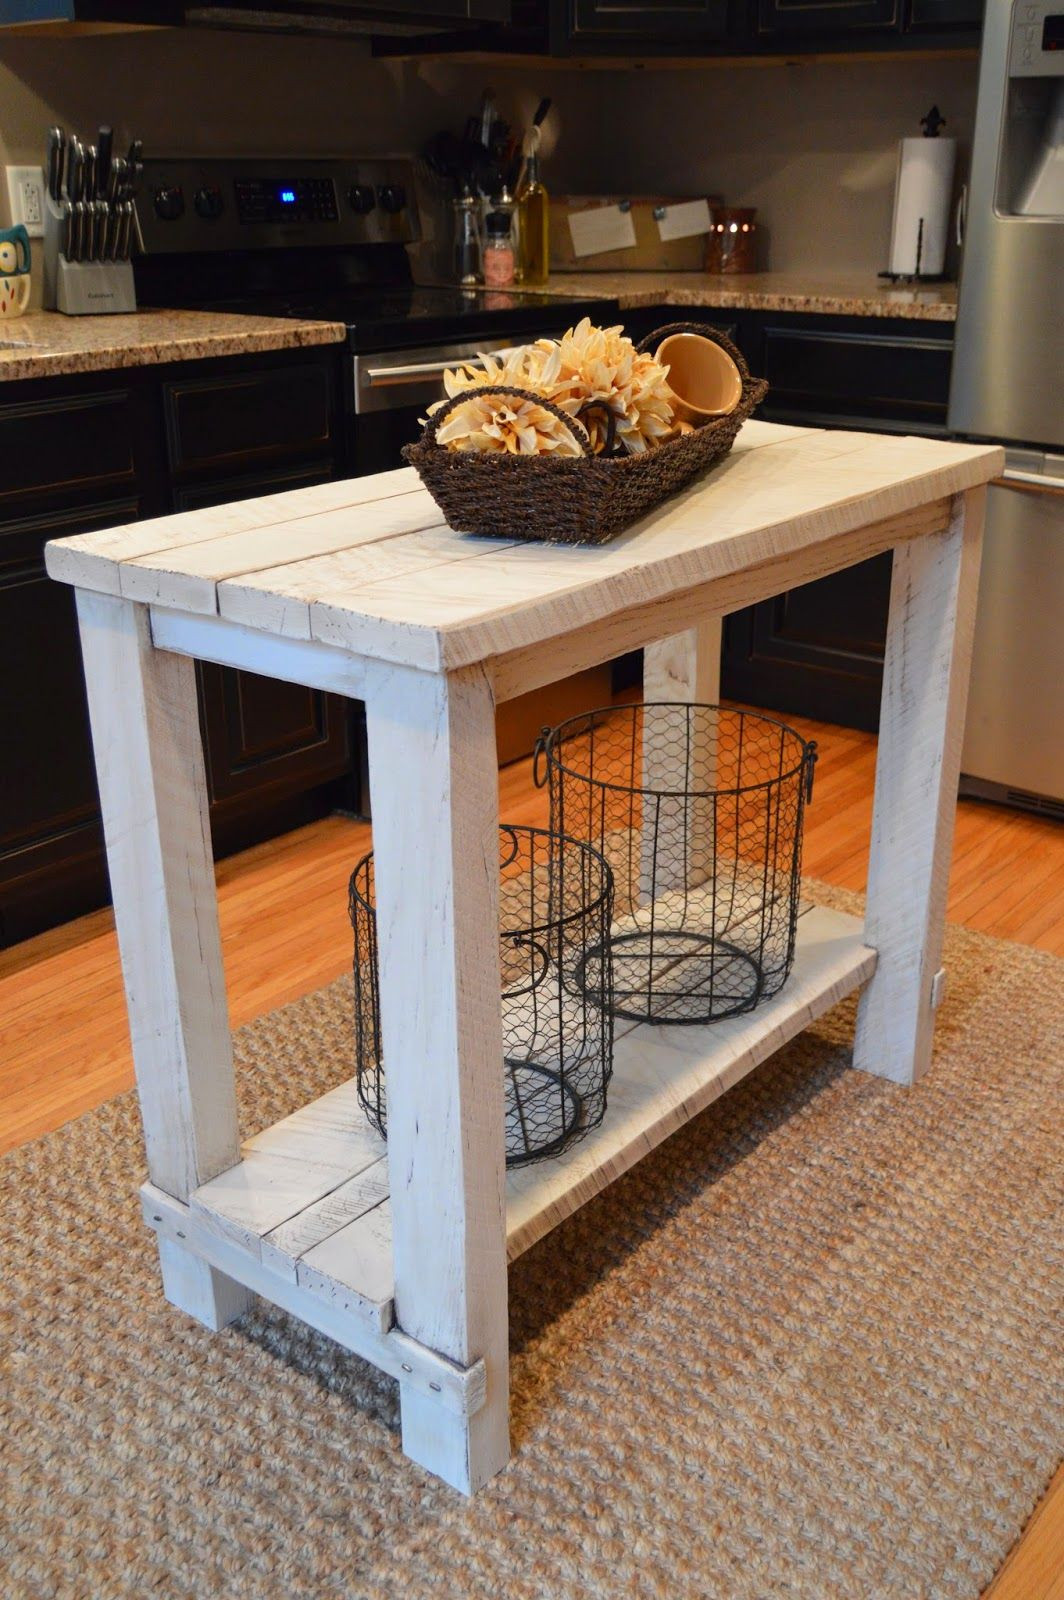 Diy Small Kitchen Table
 15 Gorgeous DIY Kitchen Islands For Every Bud